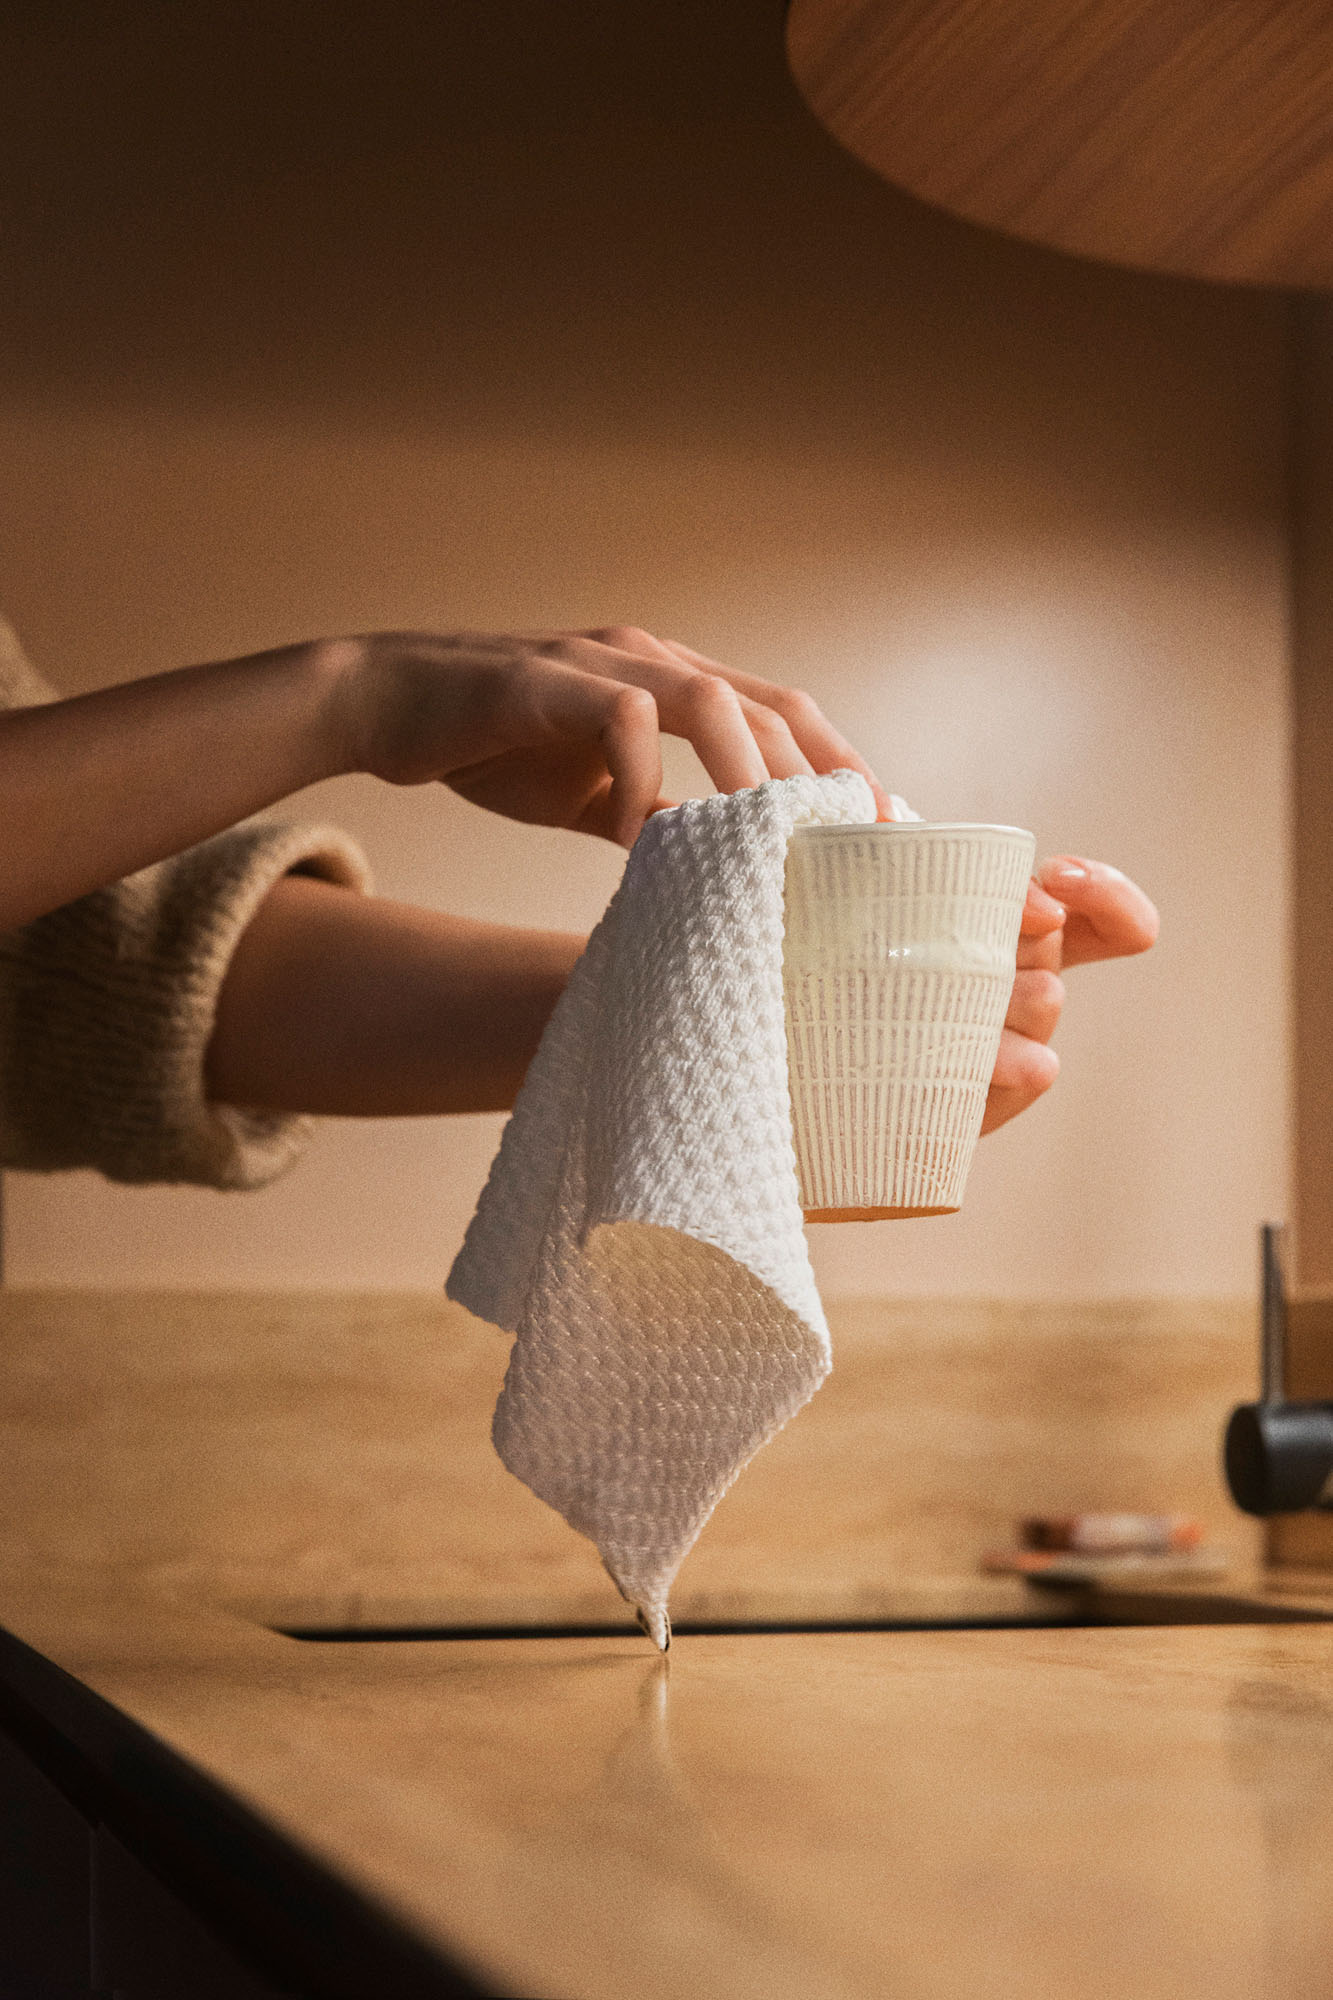 person using cloth to clean cup